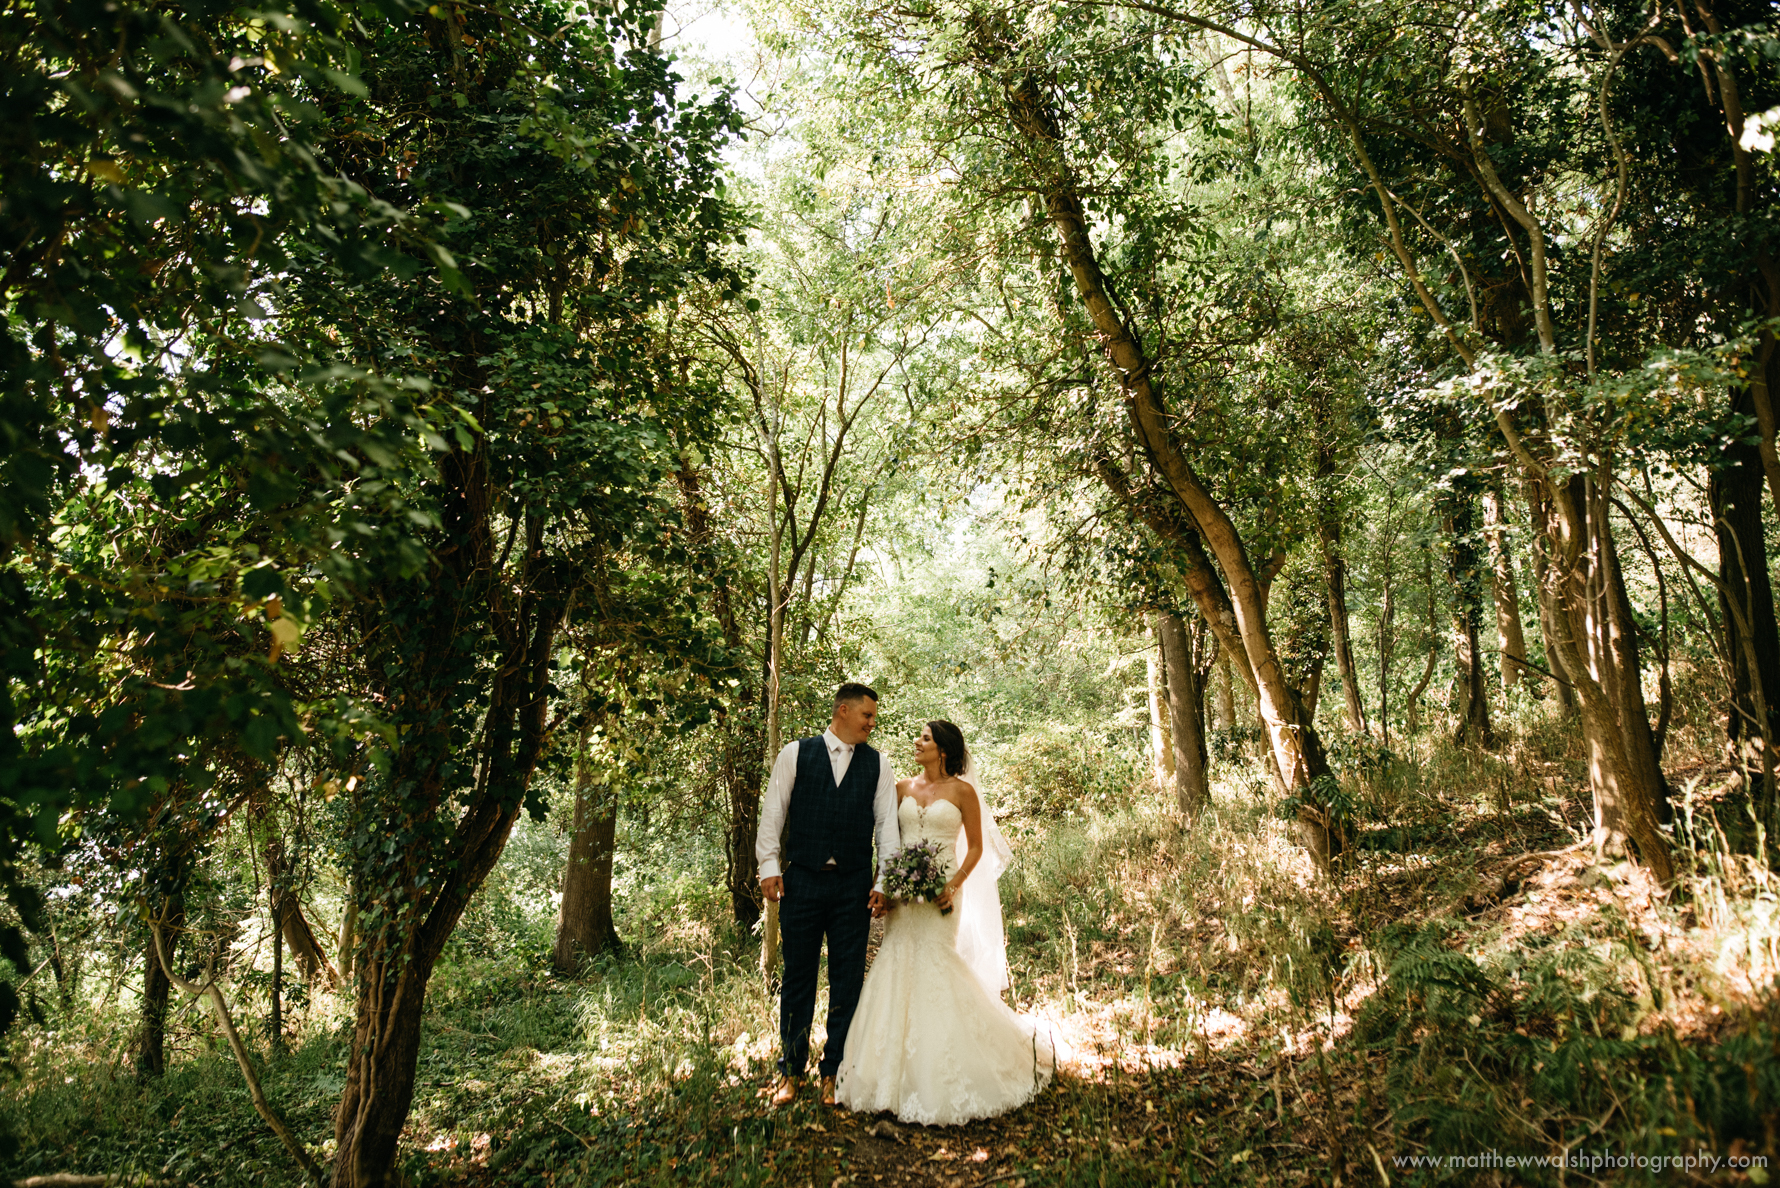 Touching moment as the new husband and wife stand under the artistic dappled light of the trees